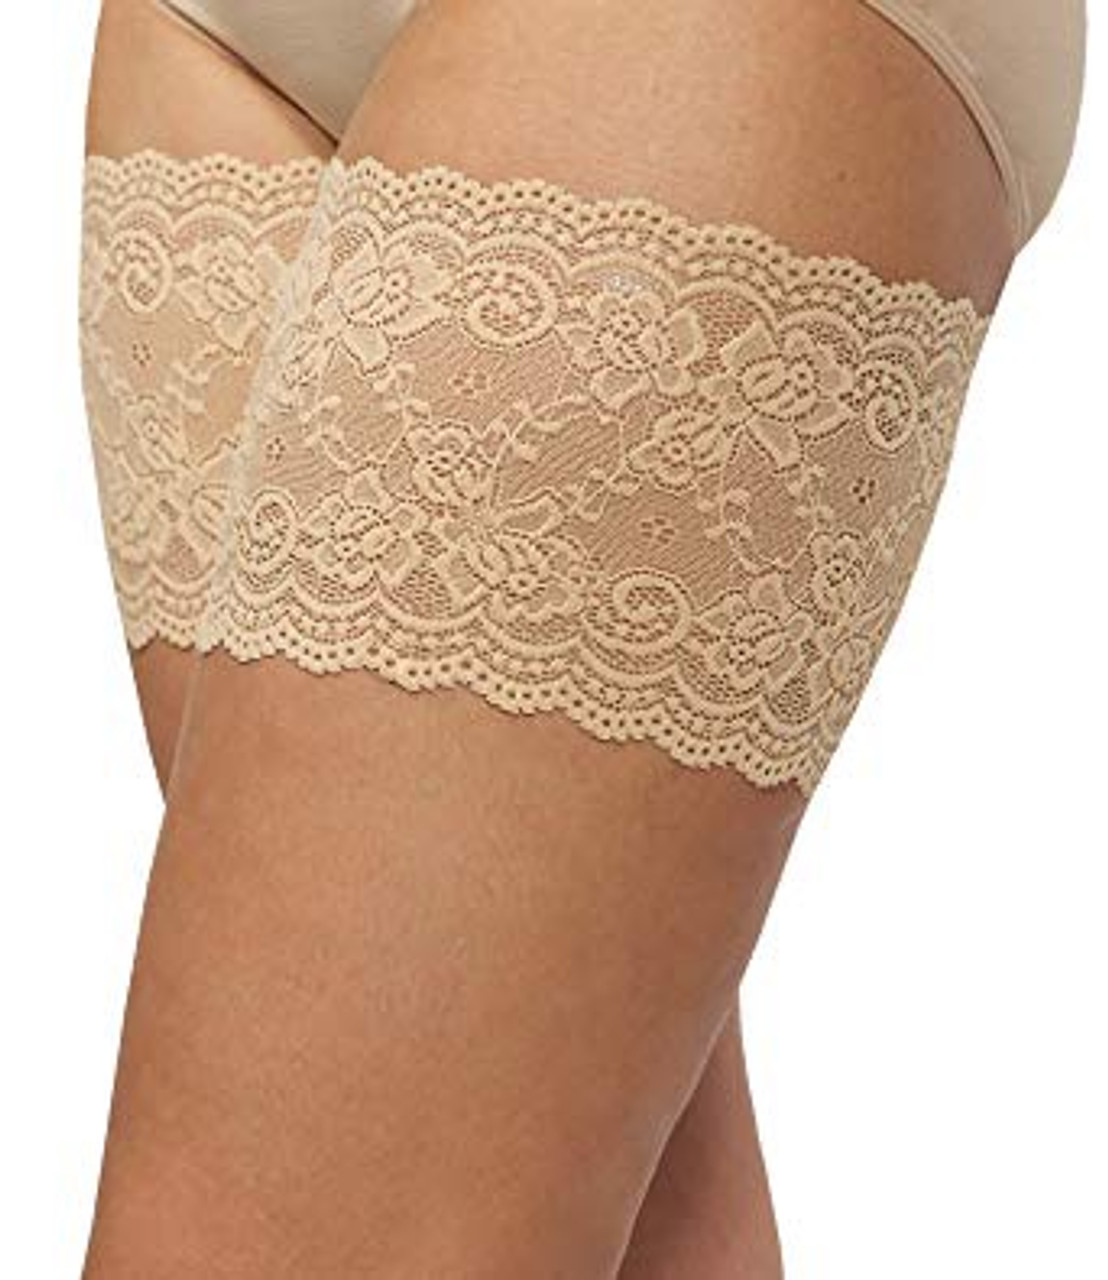 Bandelettes Elastic Anti-Chafing Lace Panty Shorts - Prevent Thigh